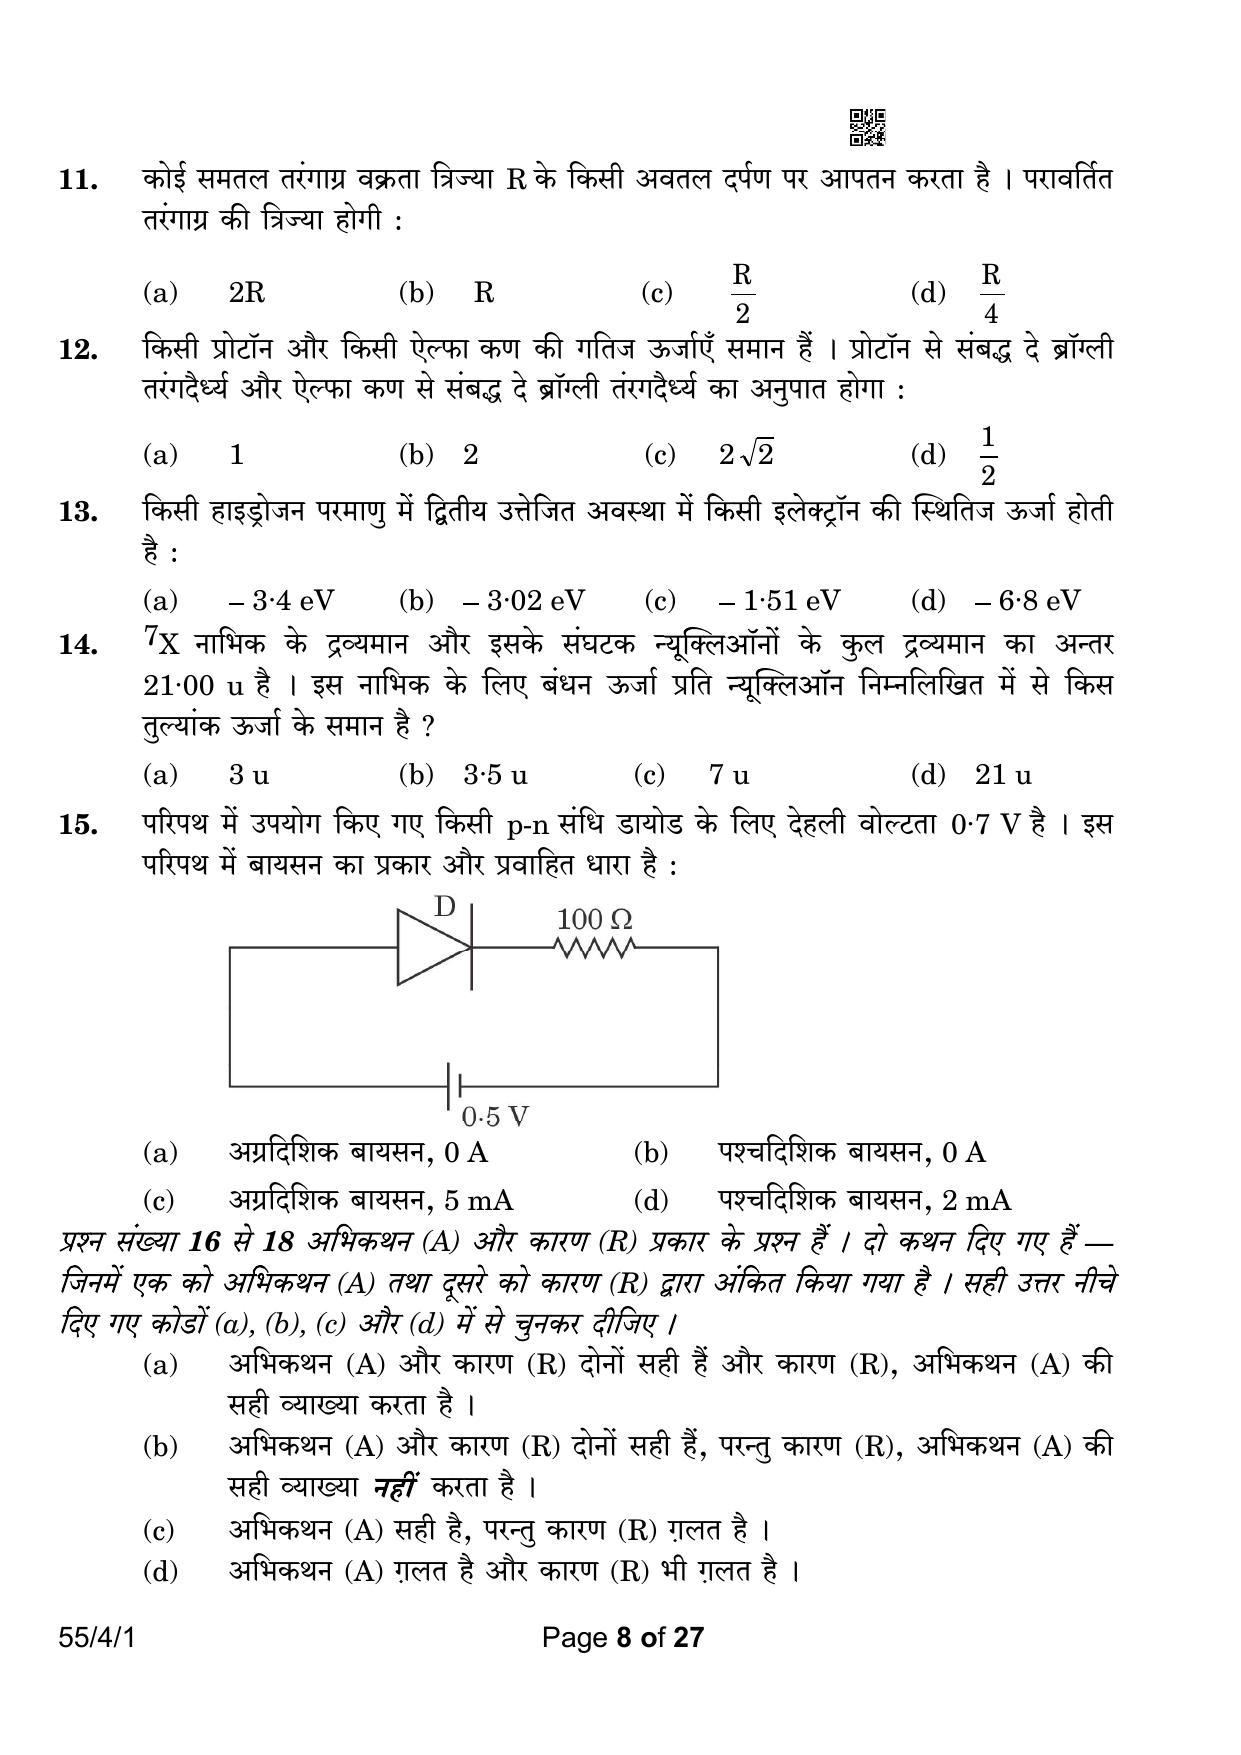 CBSE Class 12 55-4-1 Physics 2023 Question Paper - Page 8